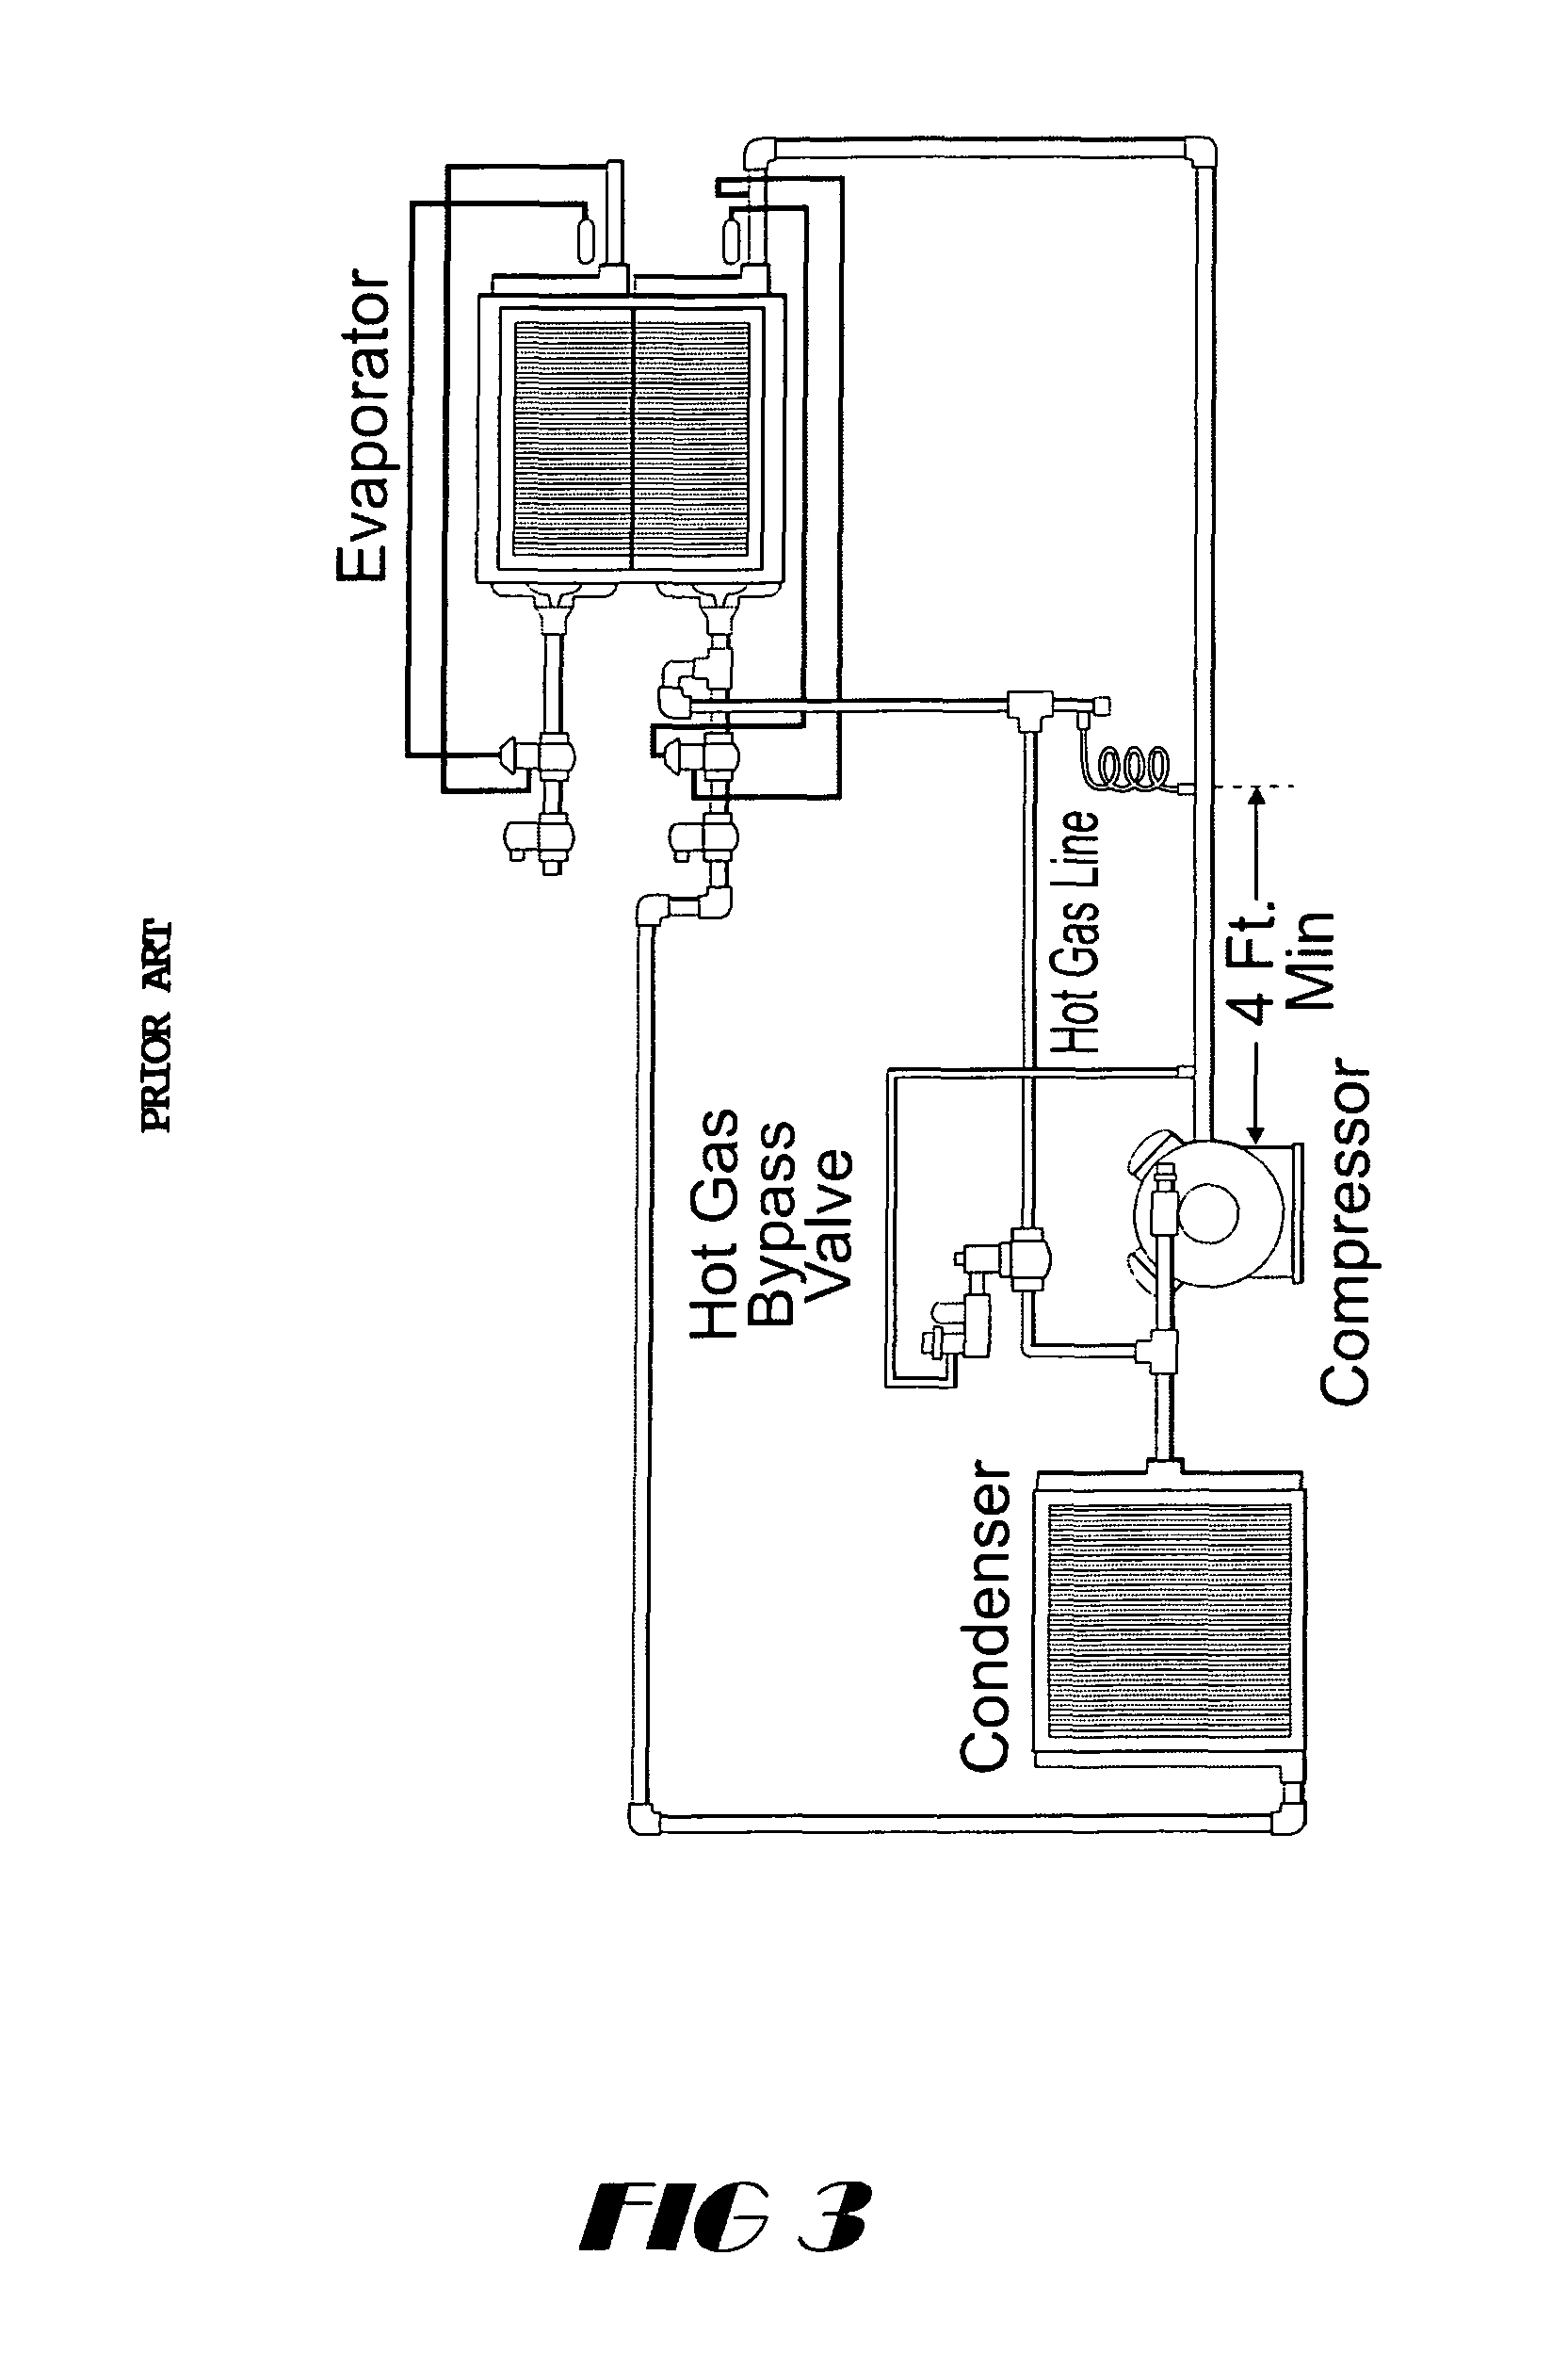 Method and apparatus for control of cooling system air quality and energy consumption